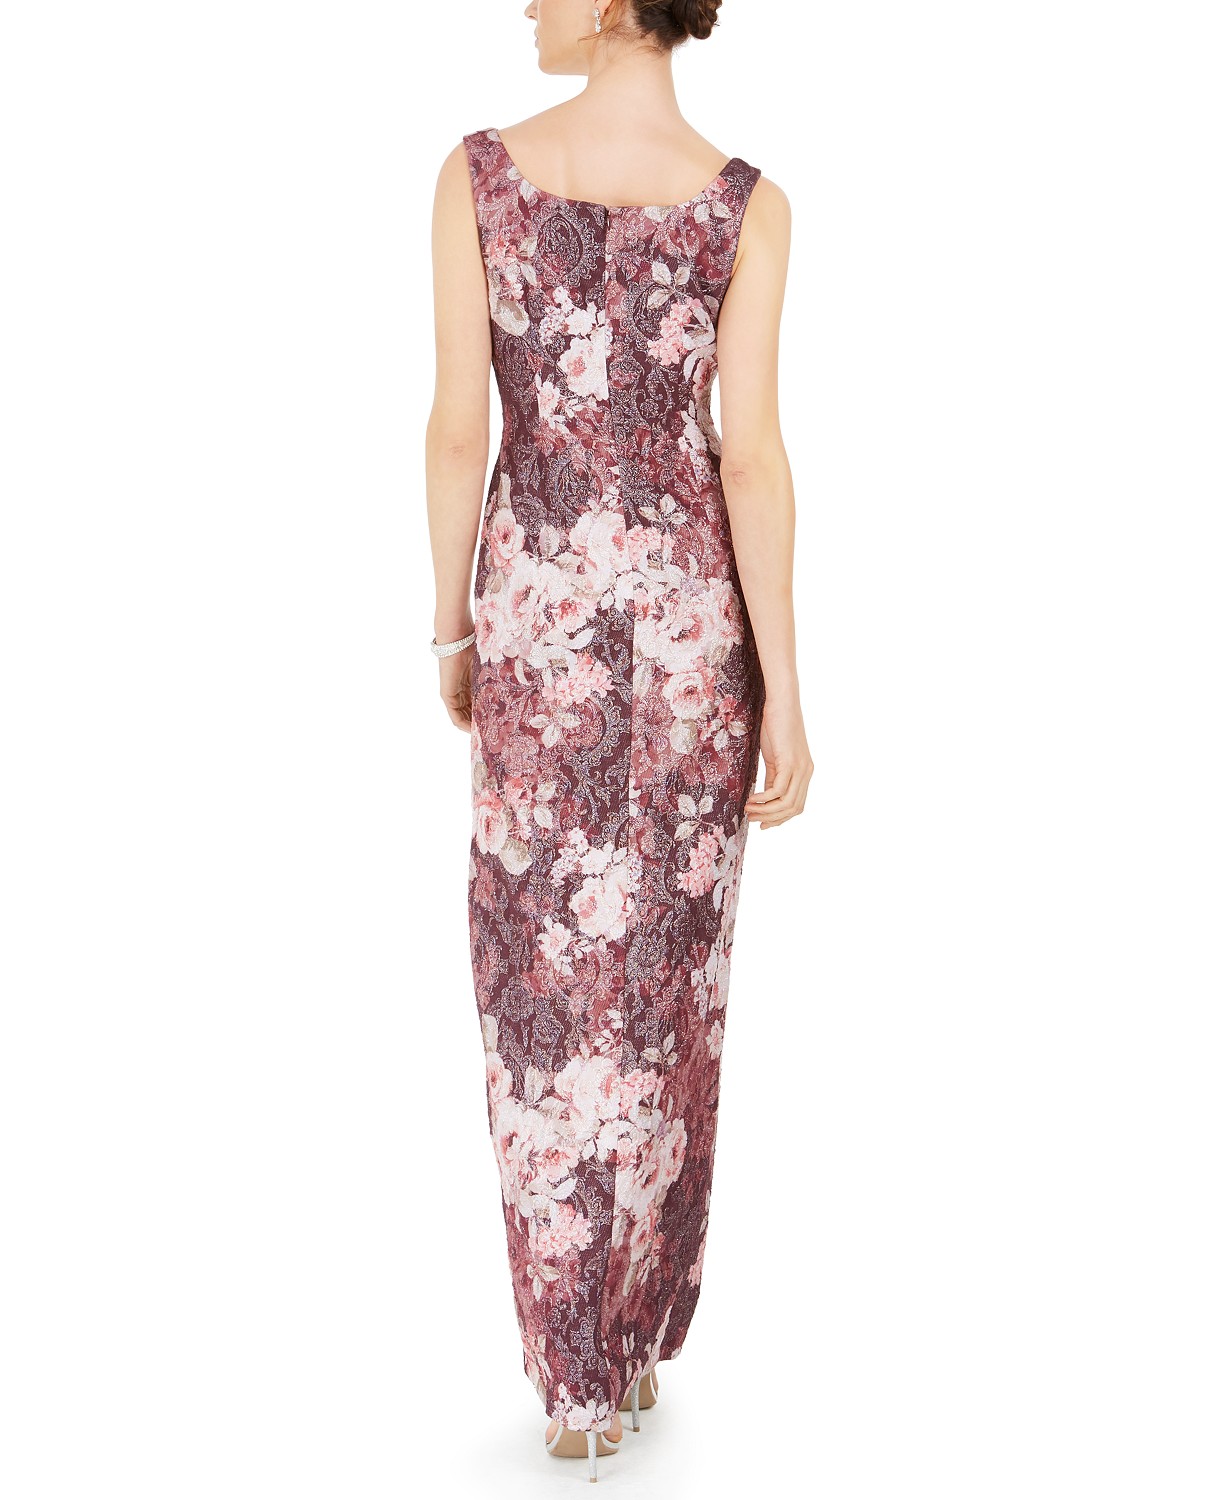 woocommerce-673321-2209615.cloudwaysapps.com-adrianna-papell-womens-metallic-floral-print-gown-dress